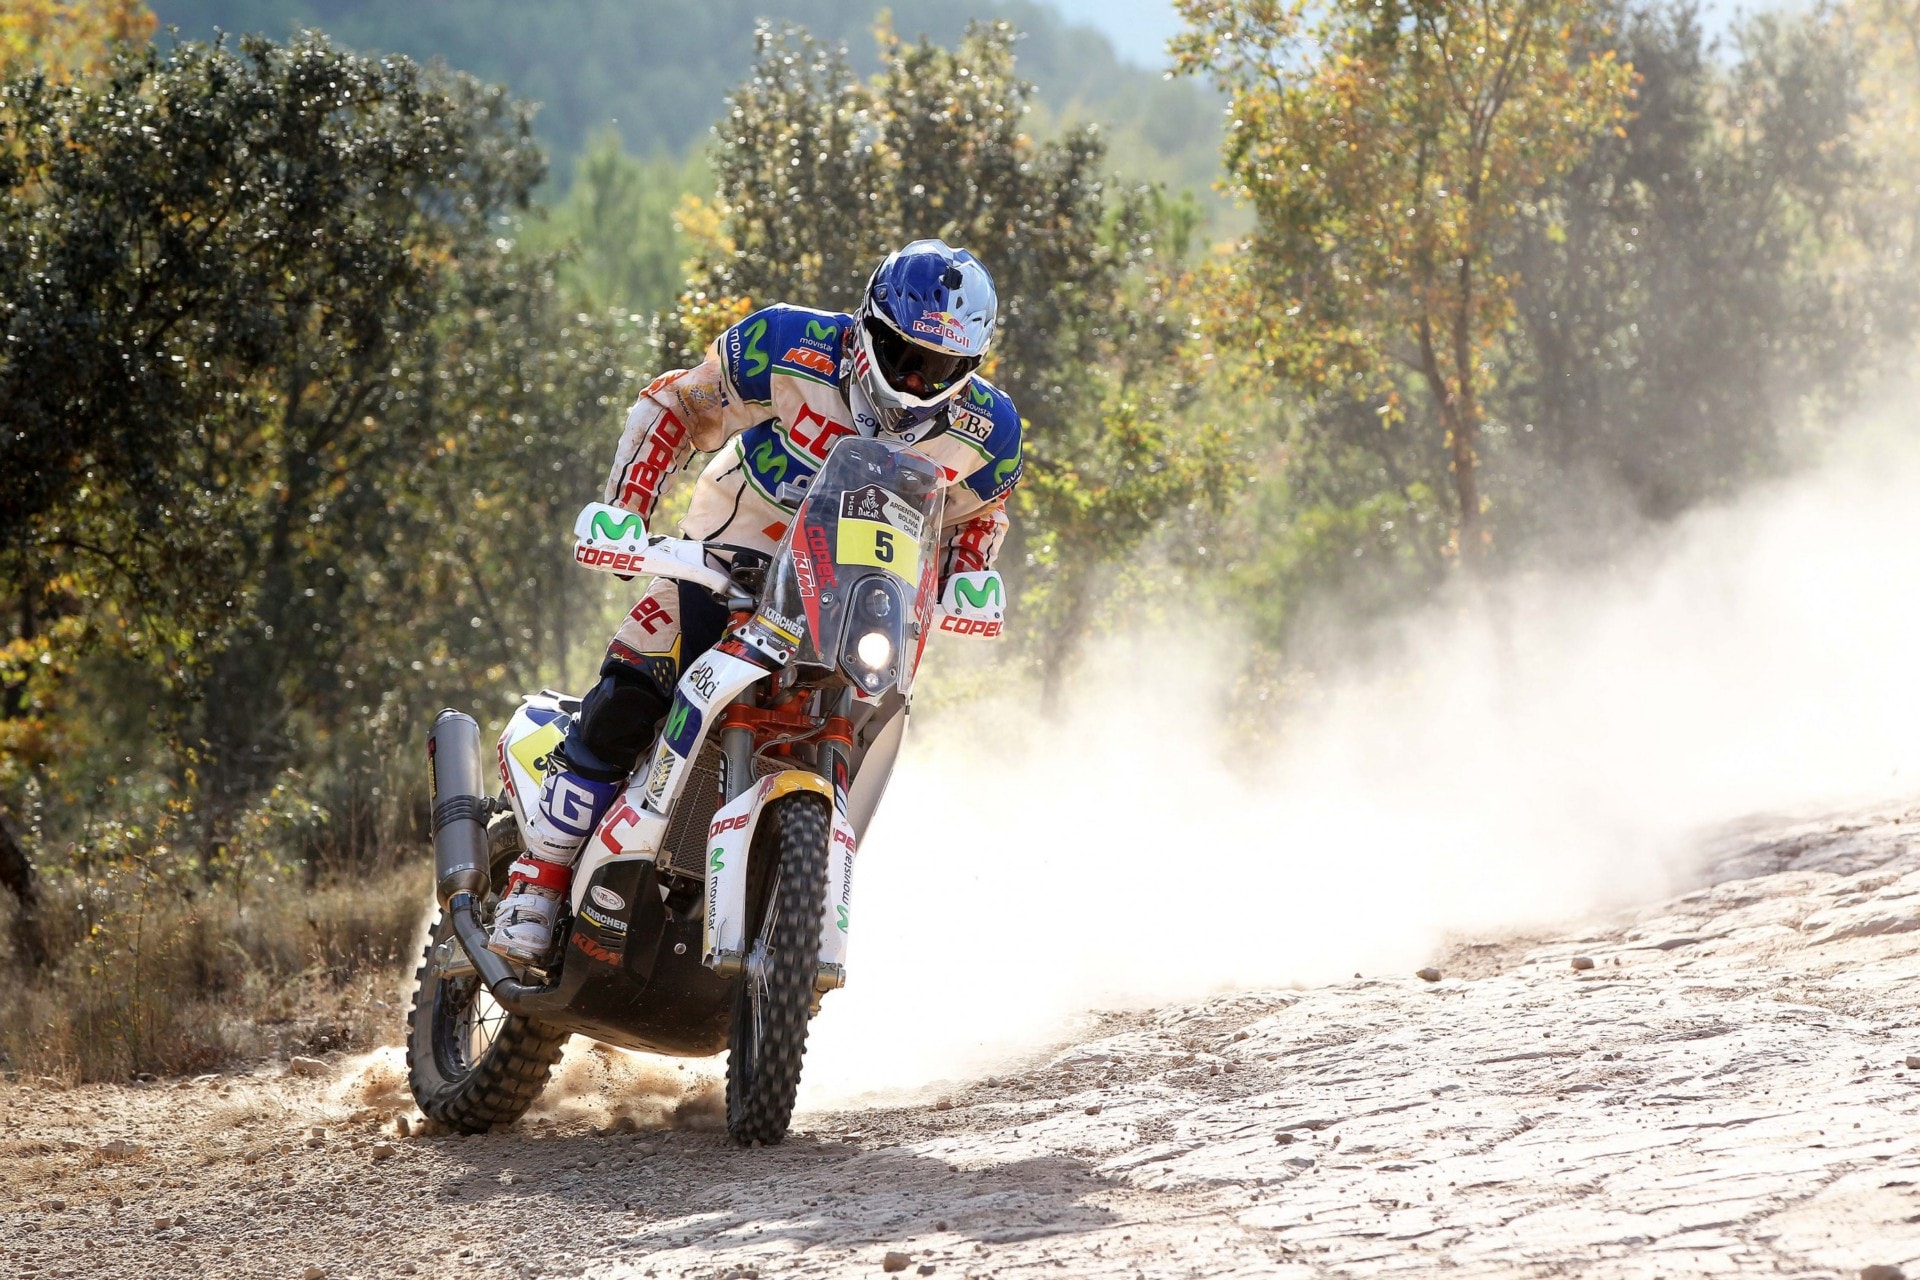 Dakar, Cross-country, off-road, extreme, motorcycle rally.